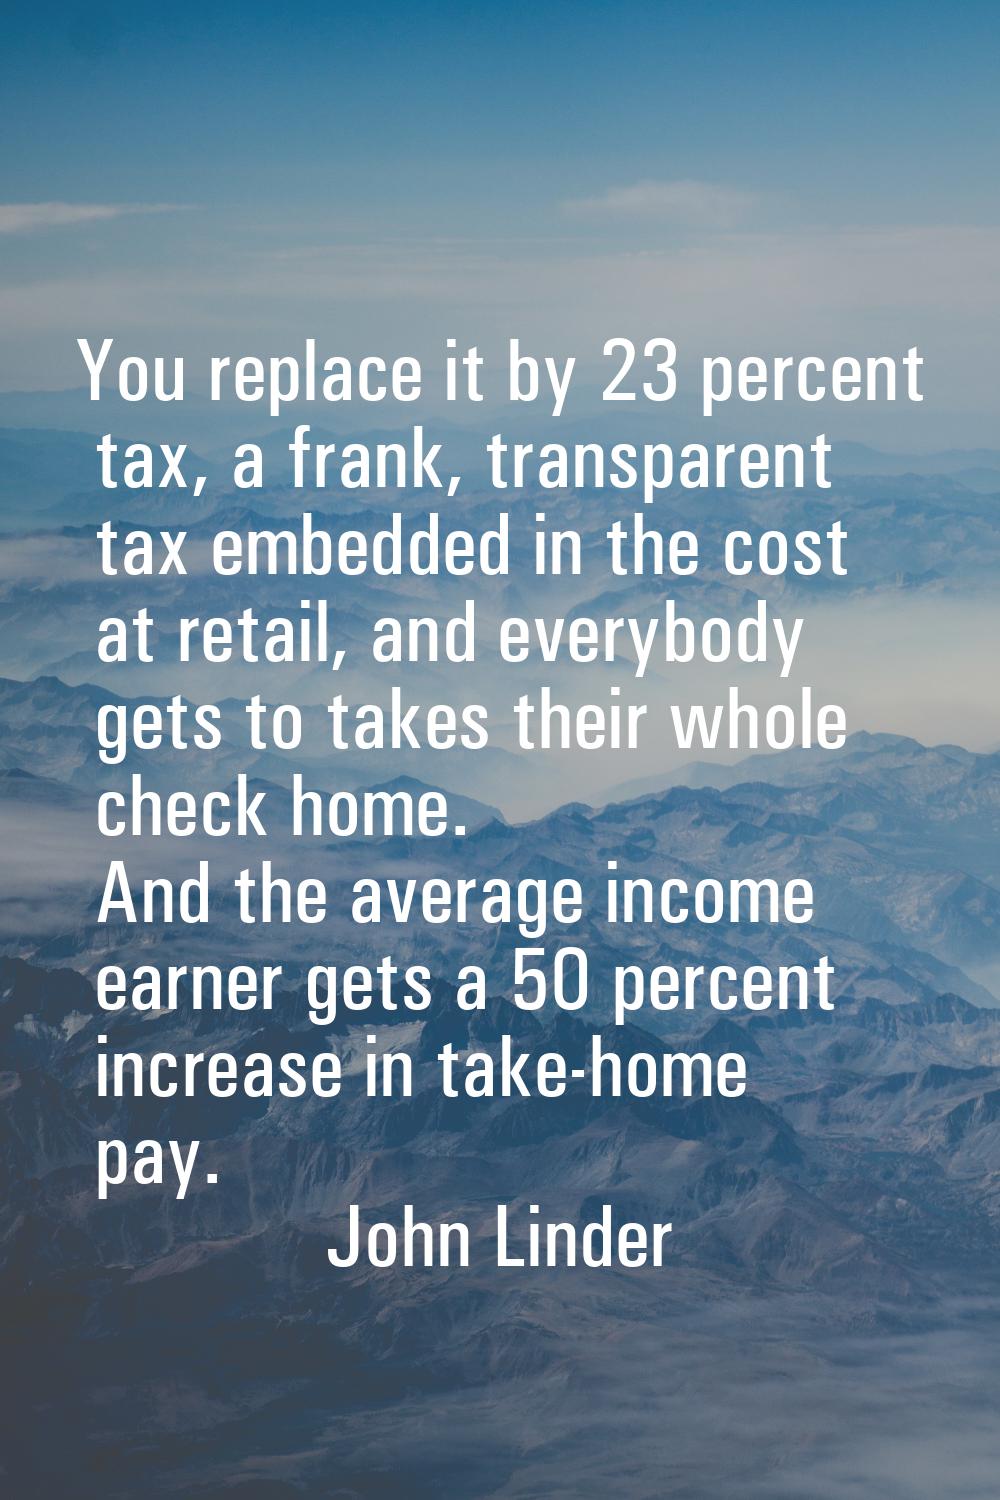 You replace it by 23 percent tax, a frank, transparent tax embedded in the cost at retail, and ever